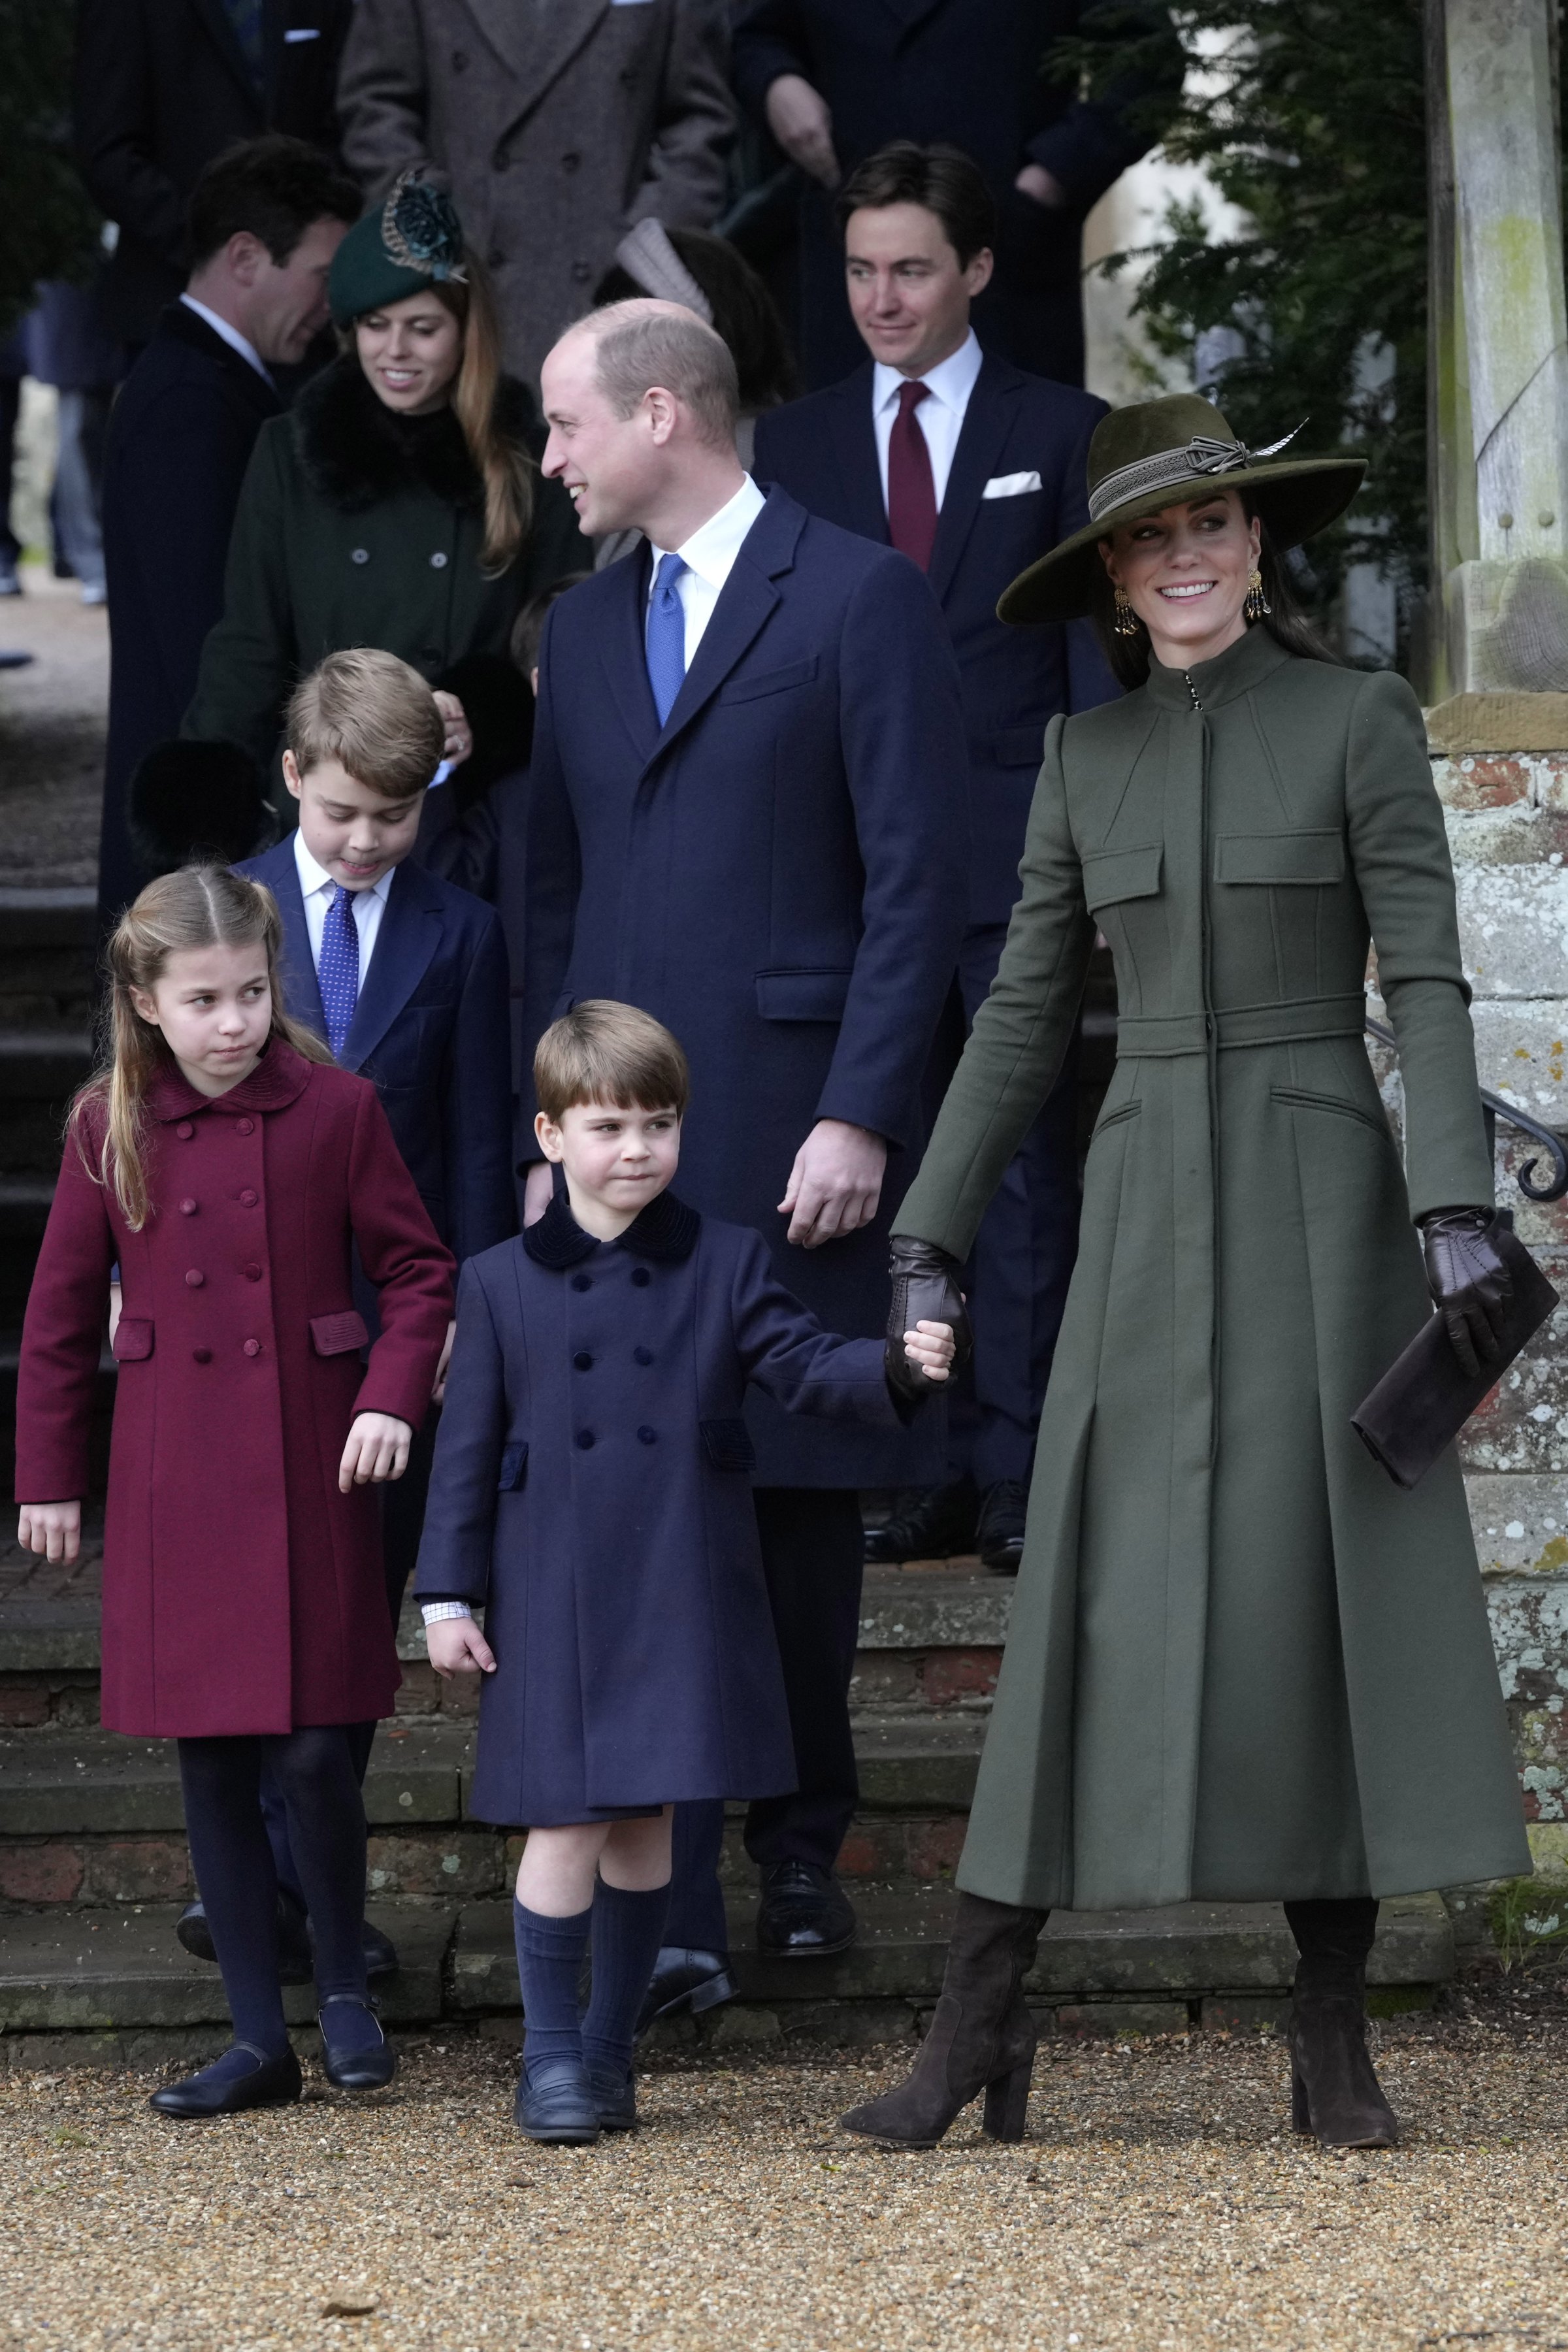 Prince William, Duchess Kate’s Sweetest Moments With Their Kids